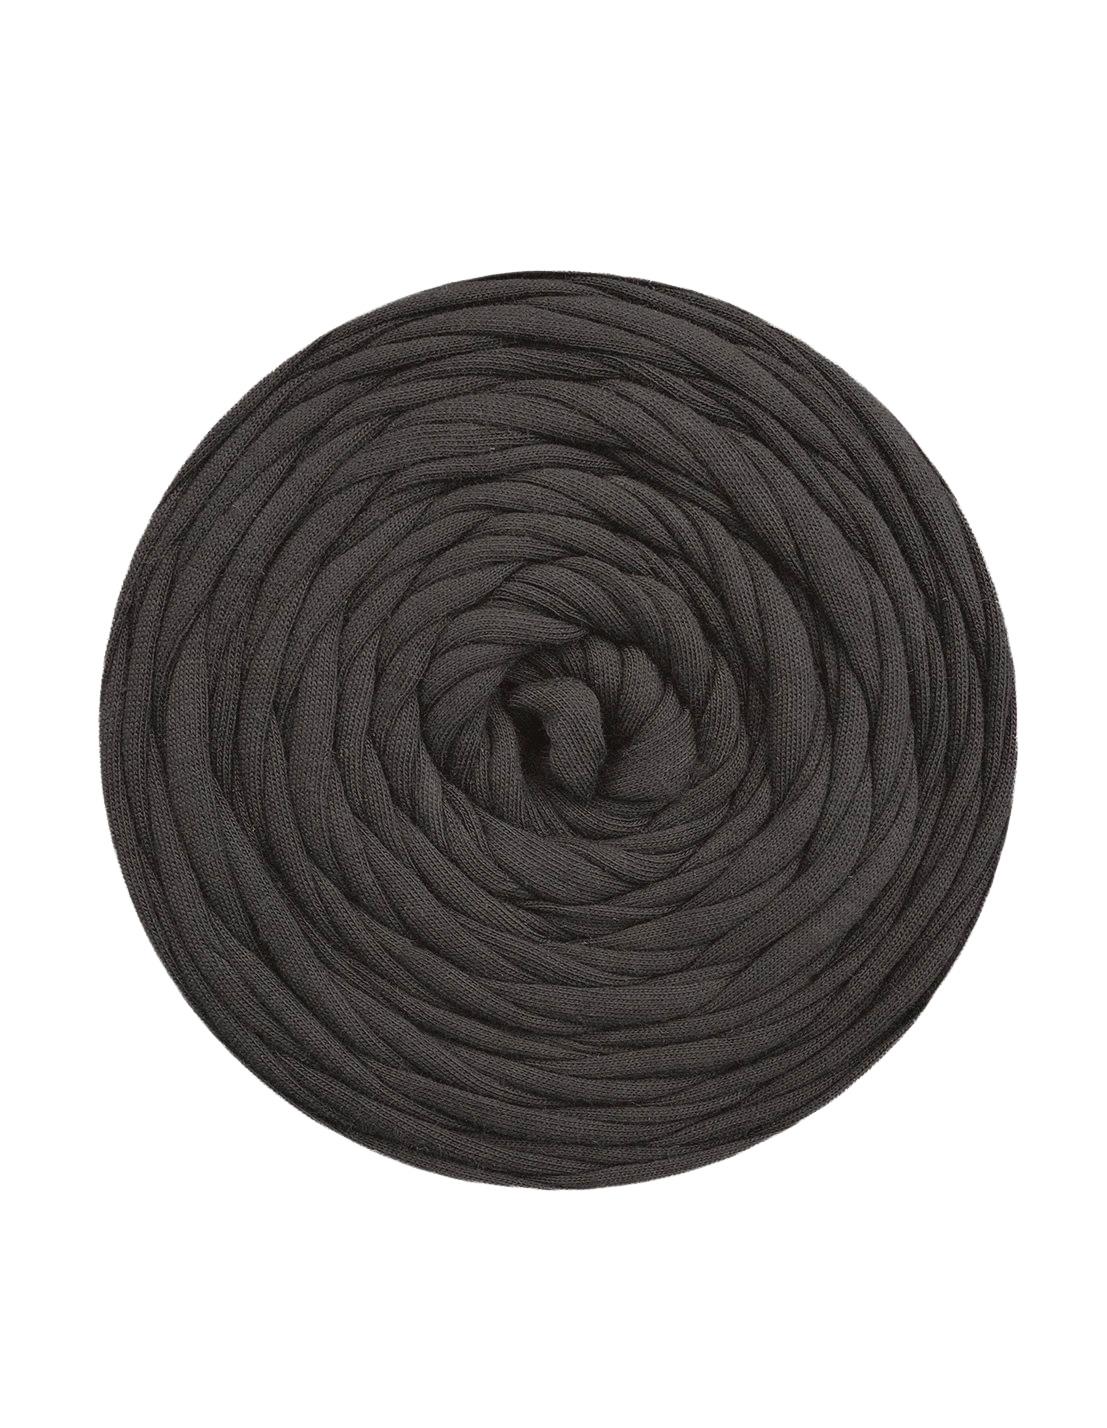 Anthracite grey t-shirt yarn by Hoooked Zpagetti (100-120m)